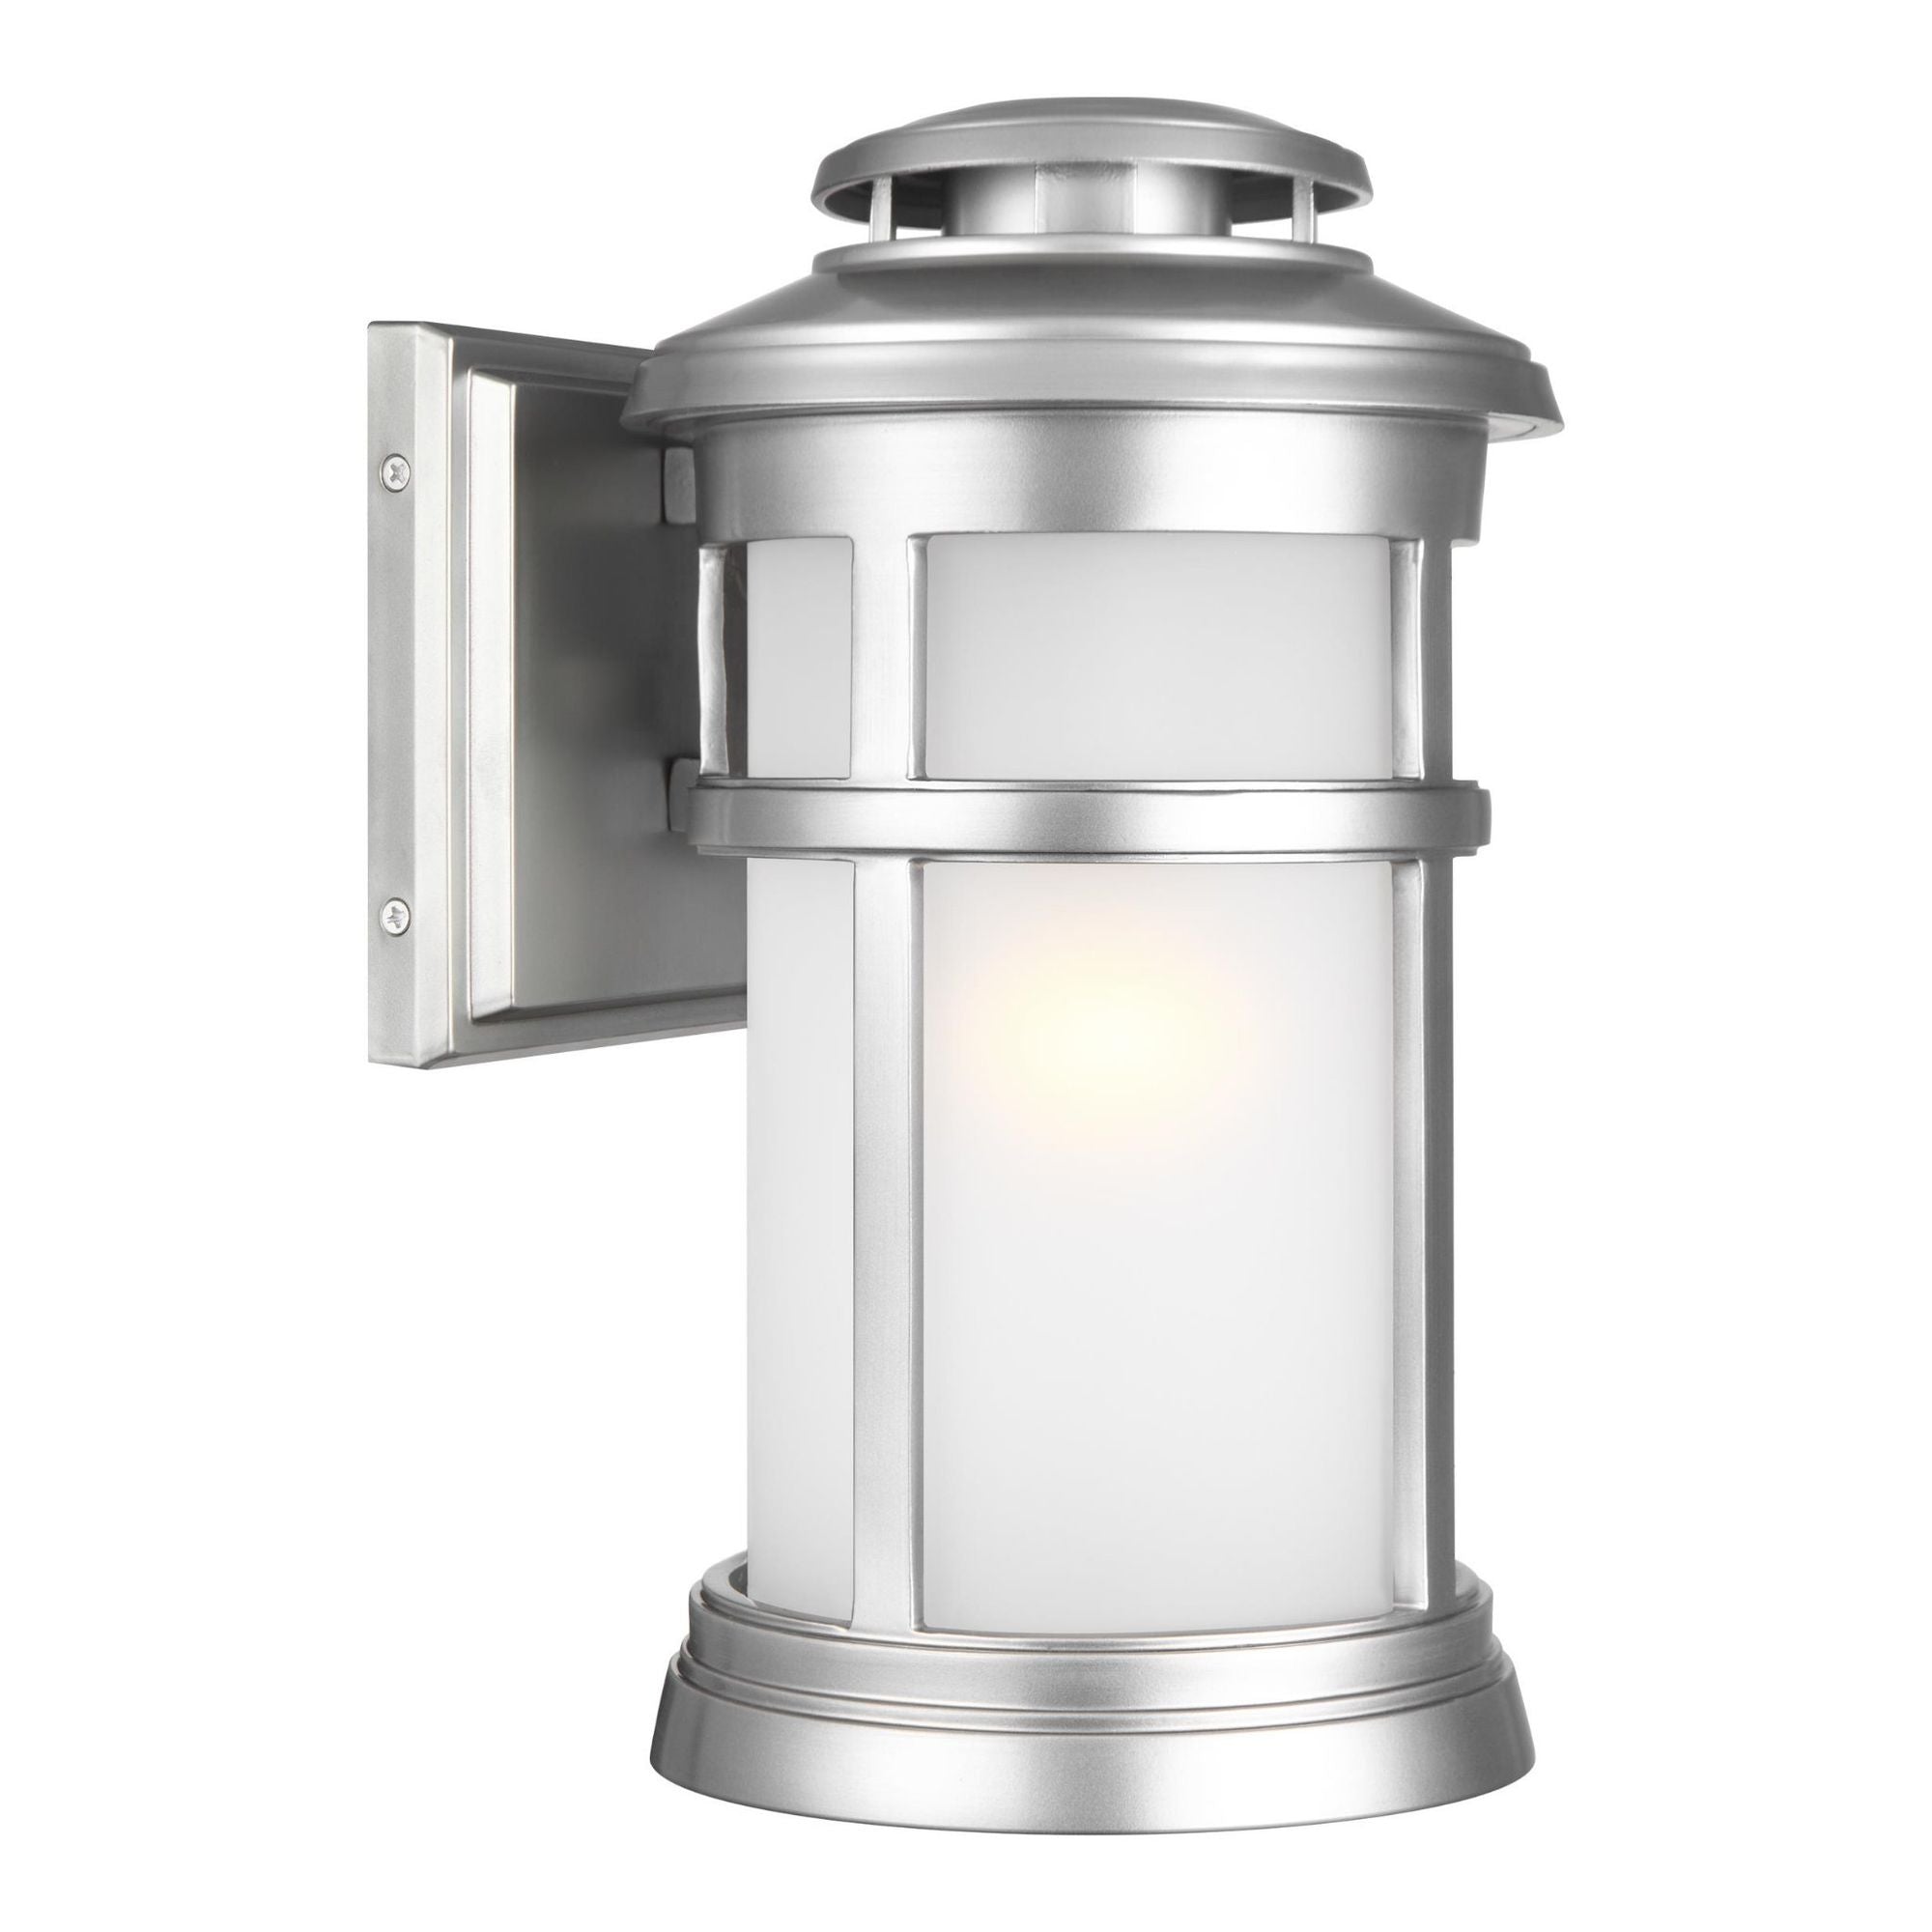 Sean Lavin Newport Small Lantern in Painted Brushed Steel